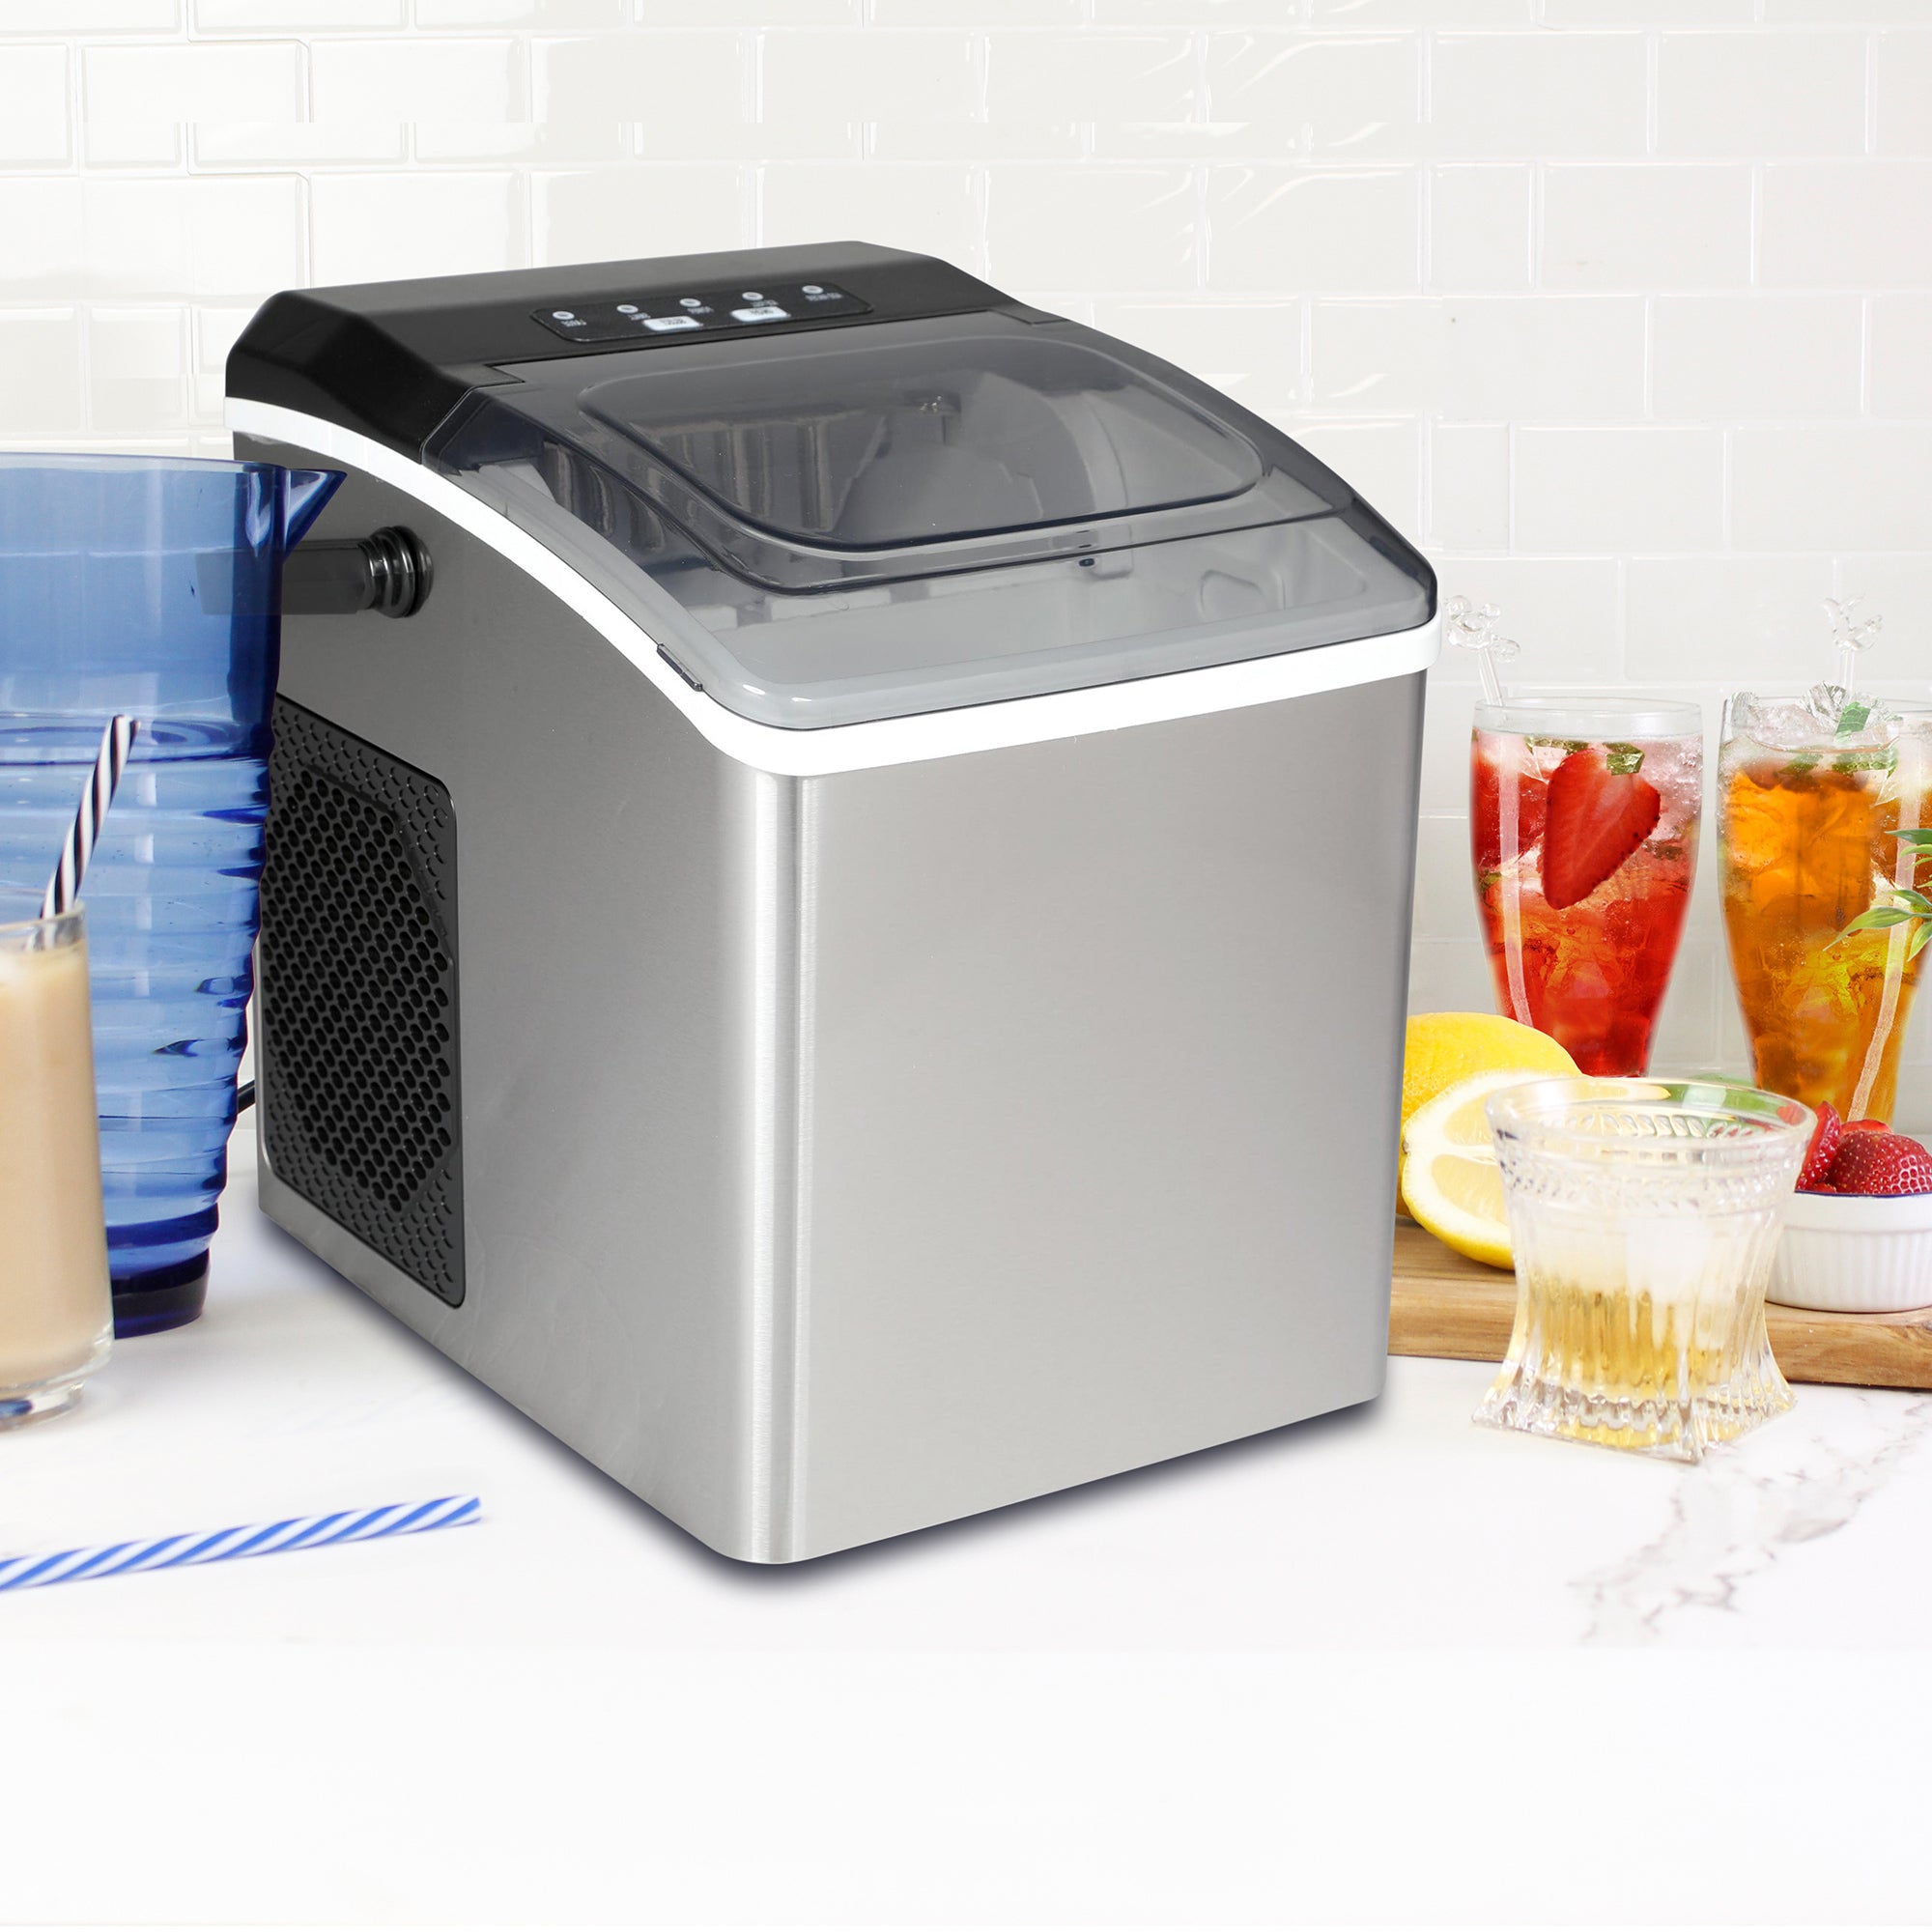 Koolatron KIM26S Ice Makers Countertop, Portable Ice Maker, 26lbs/24Hrs 9 Bullet Ice Cubes Ready in 7 Mins, Self-Cleaning Function, L&S Size, with Ice Scoop and Basket, Perfect for Party